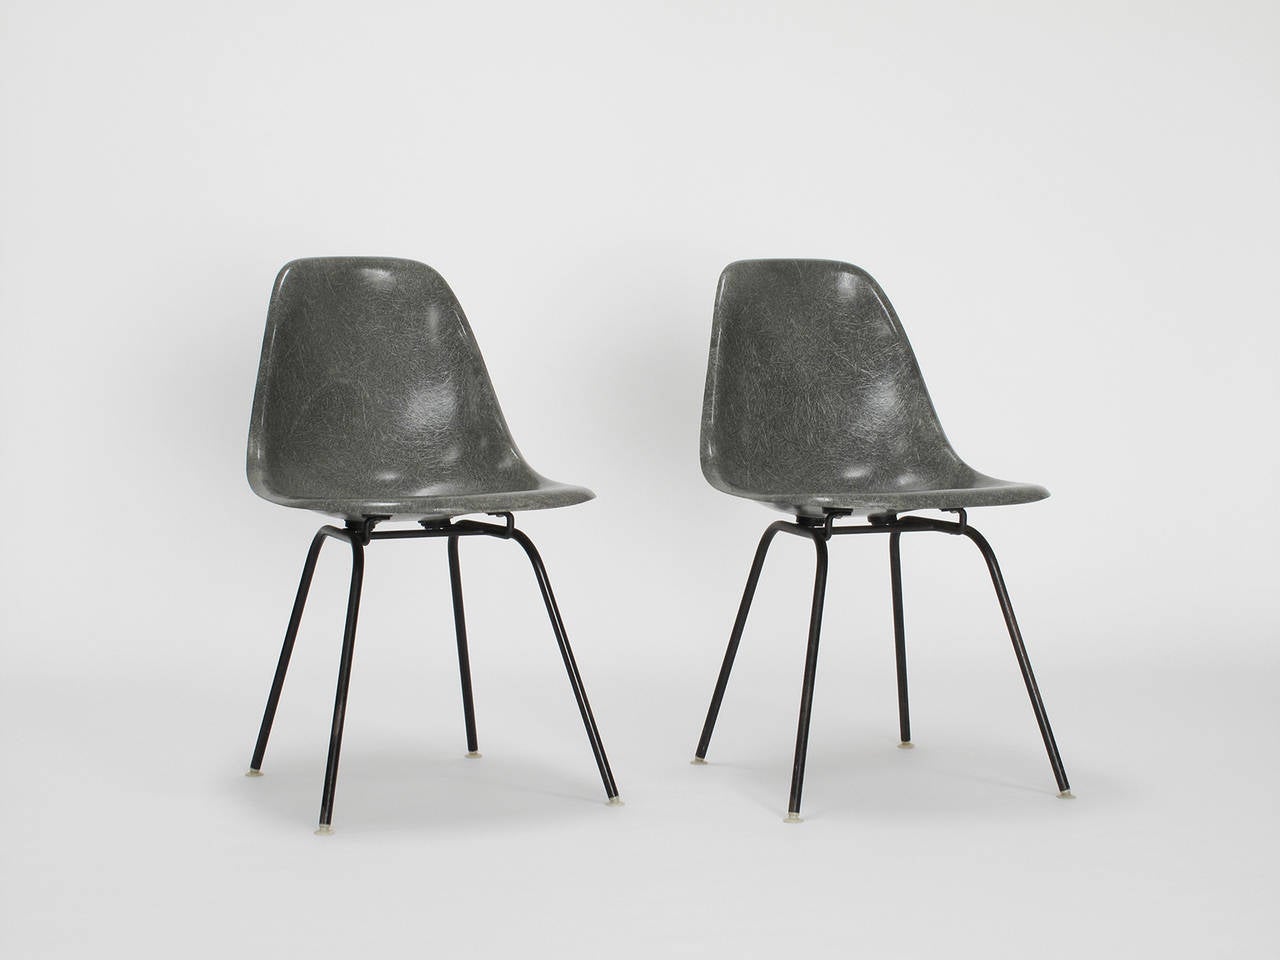 American Pair of Charles and Ray Eames Fiberglass 'Shell' Chairs, 1960s For Sale